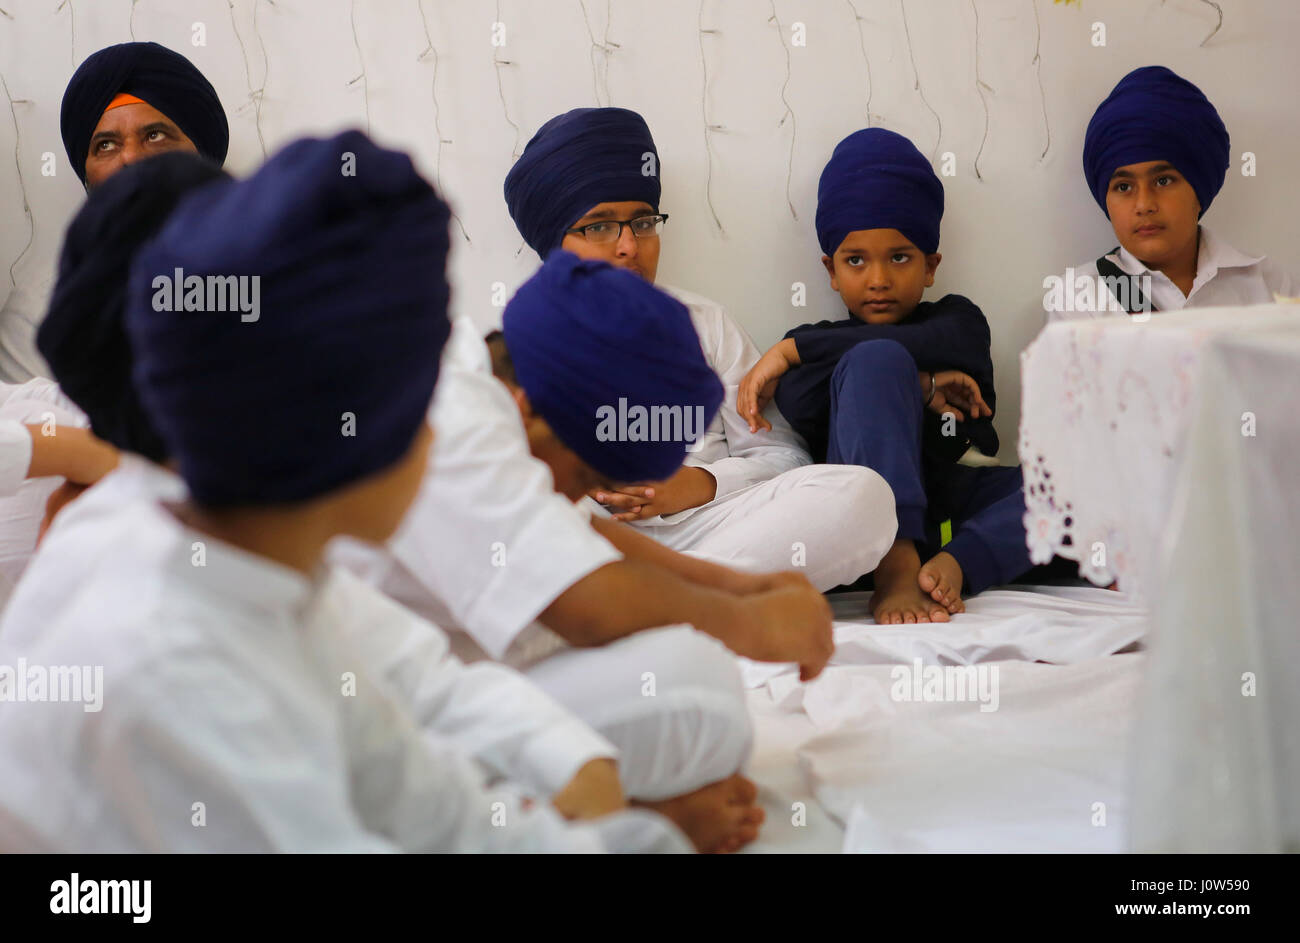 Sikh members seen during their Baisakhi celebration day inside a Sikh temple in the Spanish island of Majorca Stock Photo